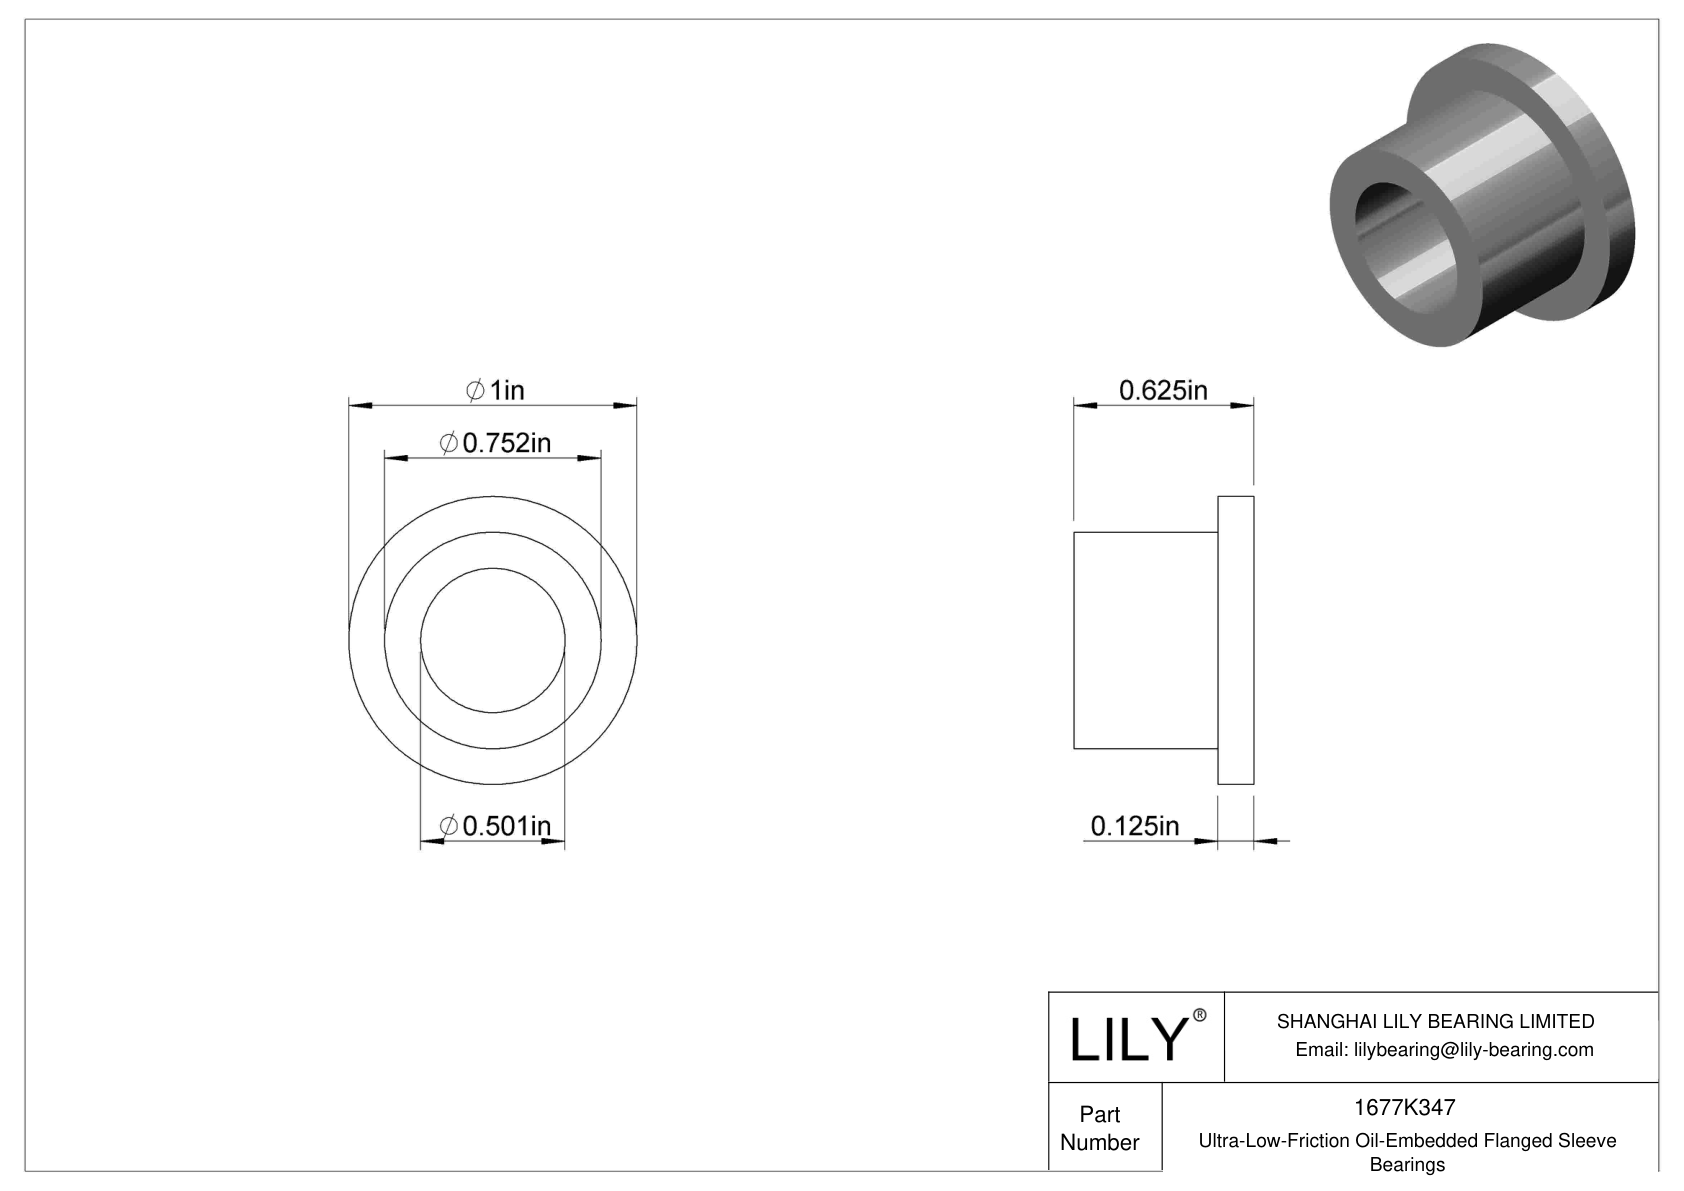 BGHHKDEH Ultra-Low-Friction Oil-Embedded Flanged Sleeve Bearings cad drawing